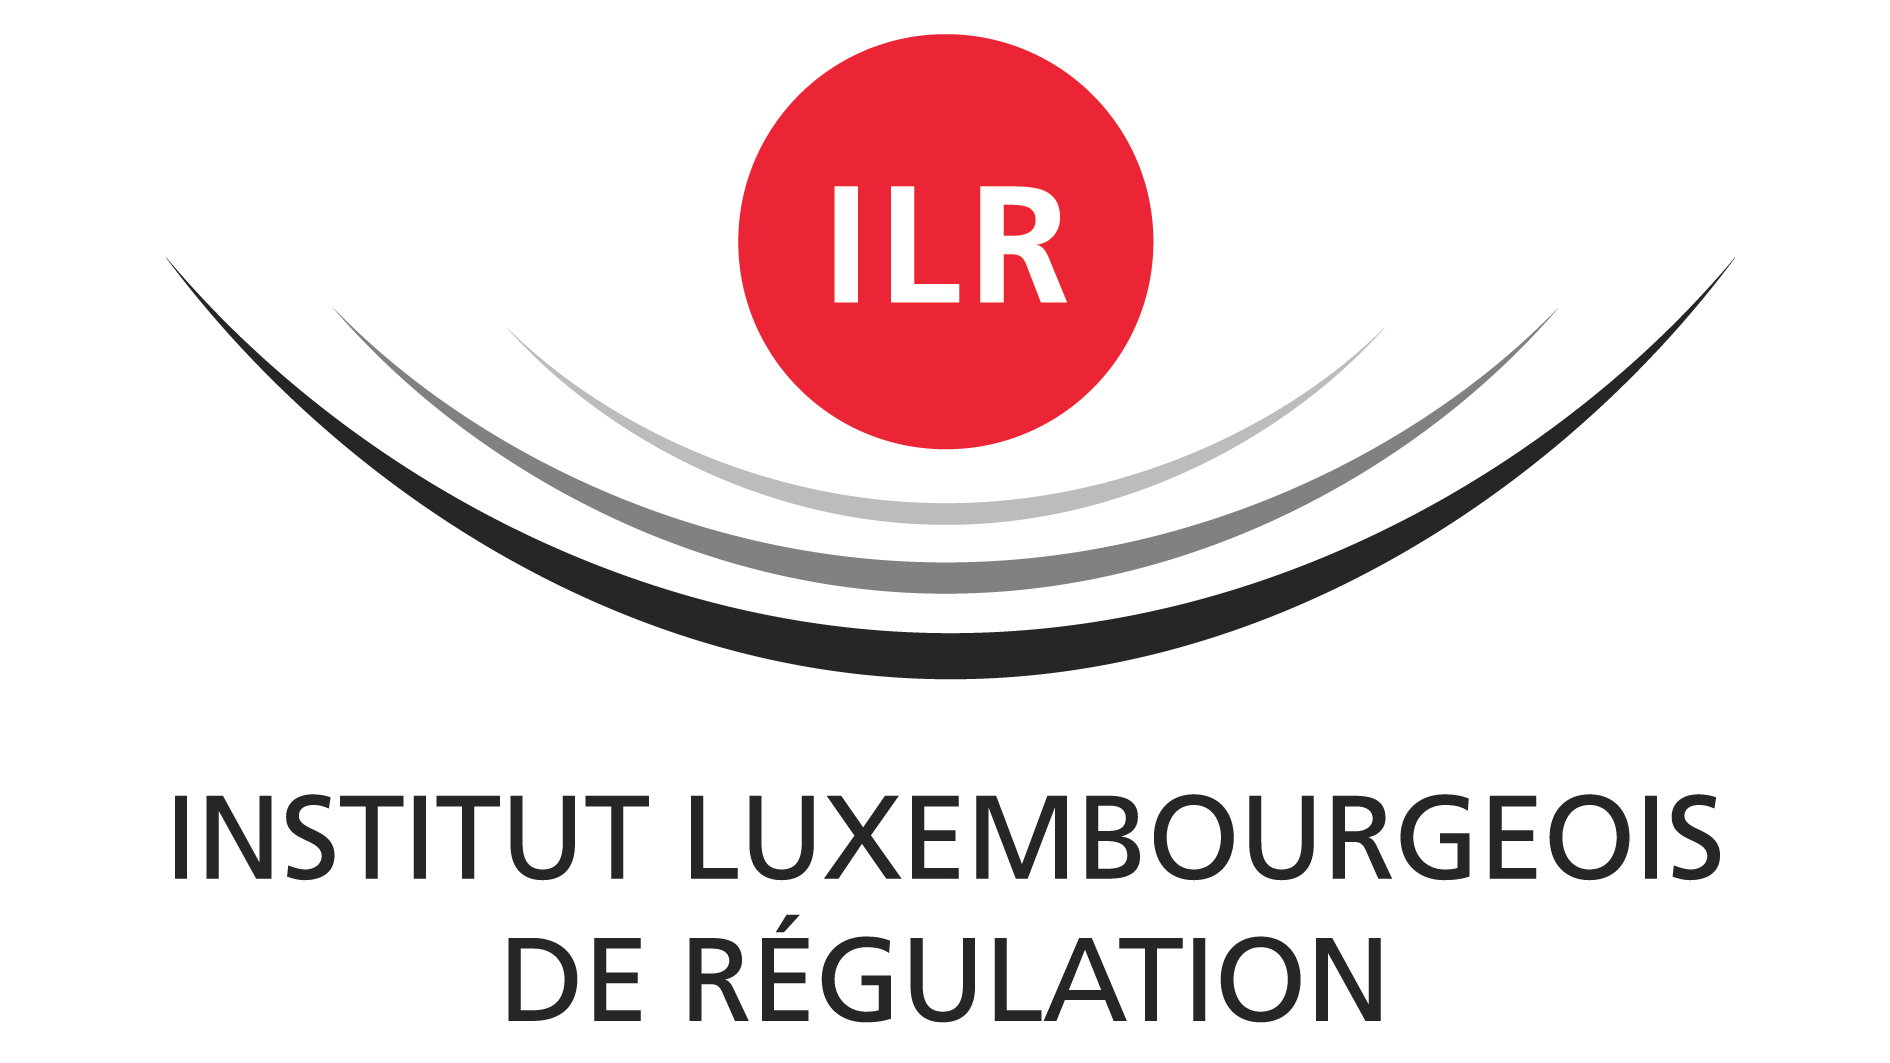 The image shows the ILR logoLuxembourg